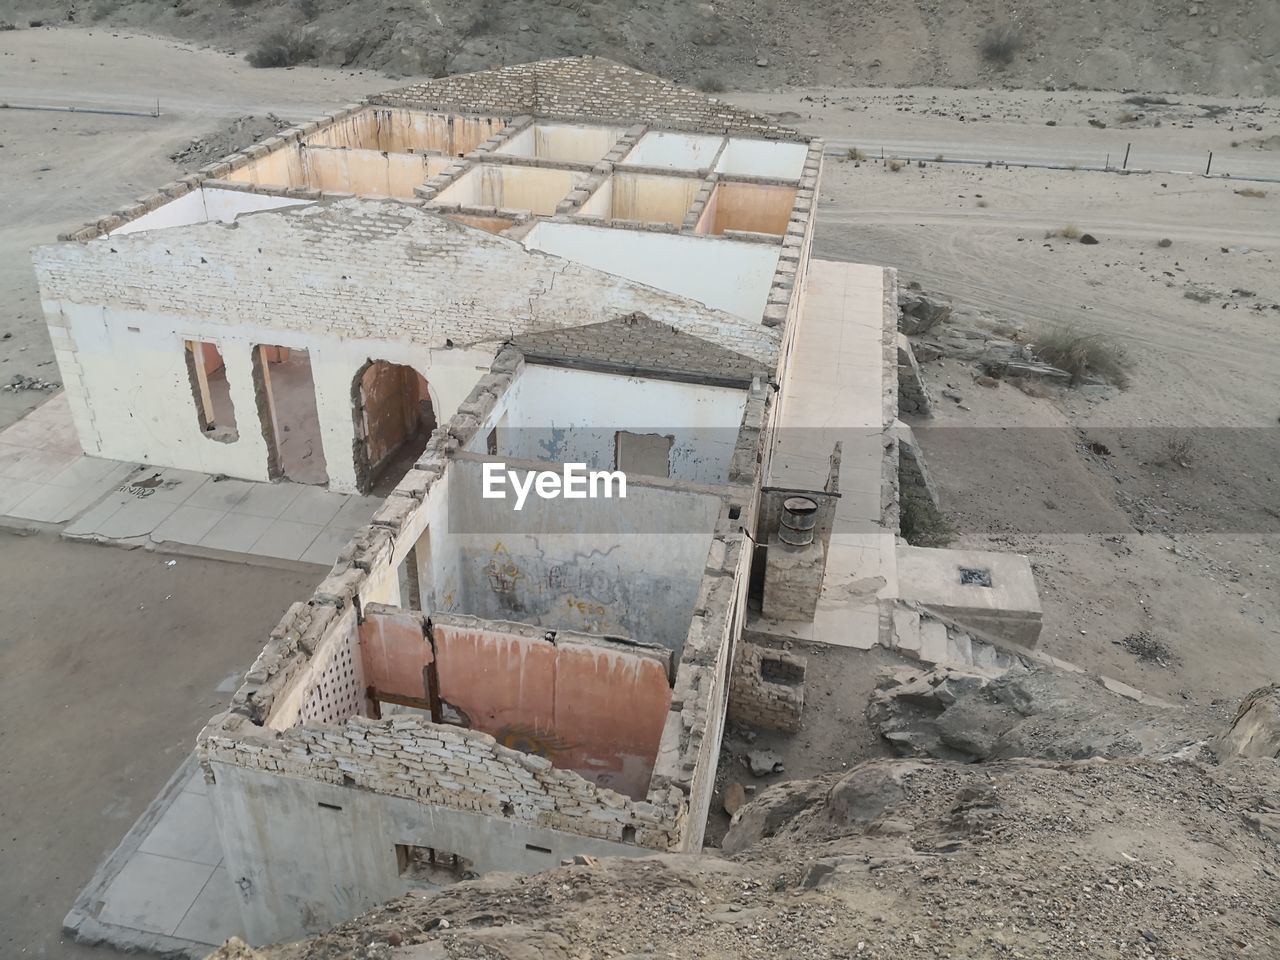 HIGH ANGLE VIEW OF ABANDONED BUILDINGS